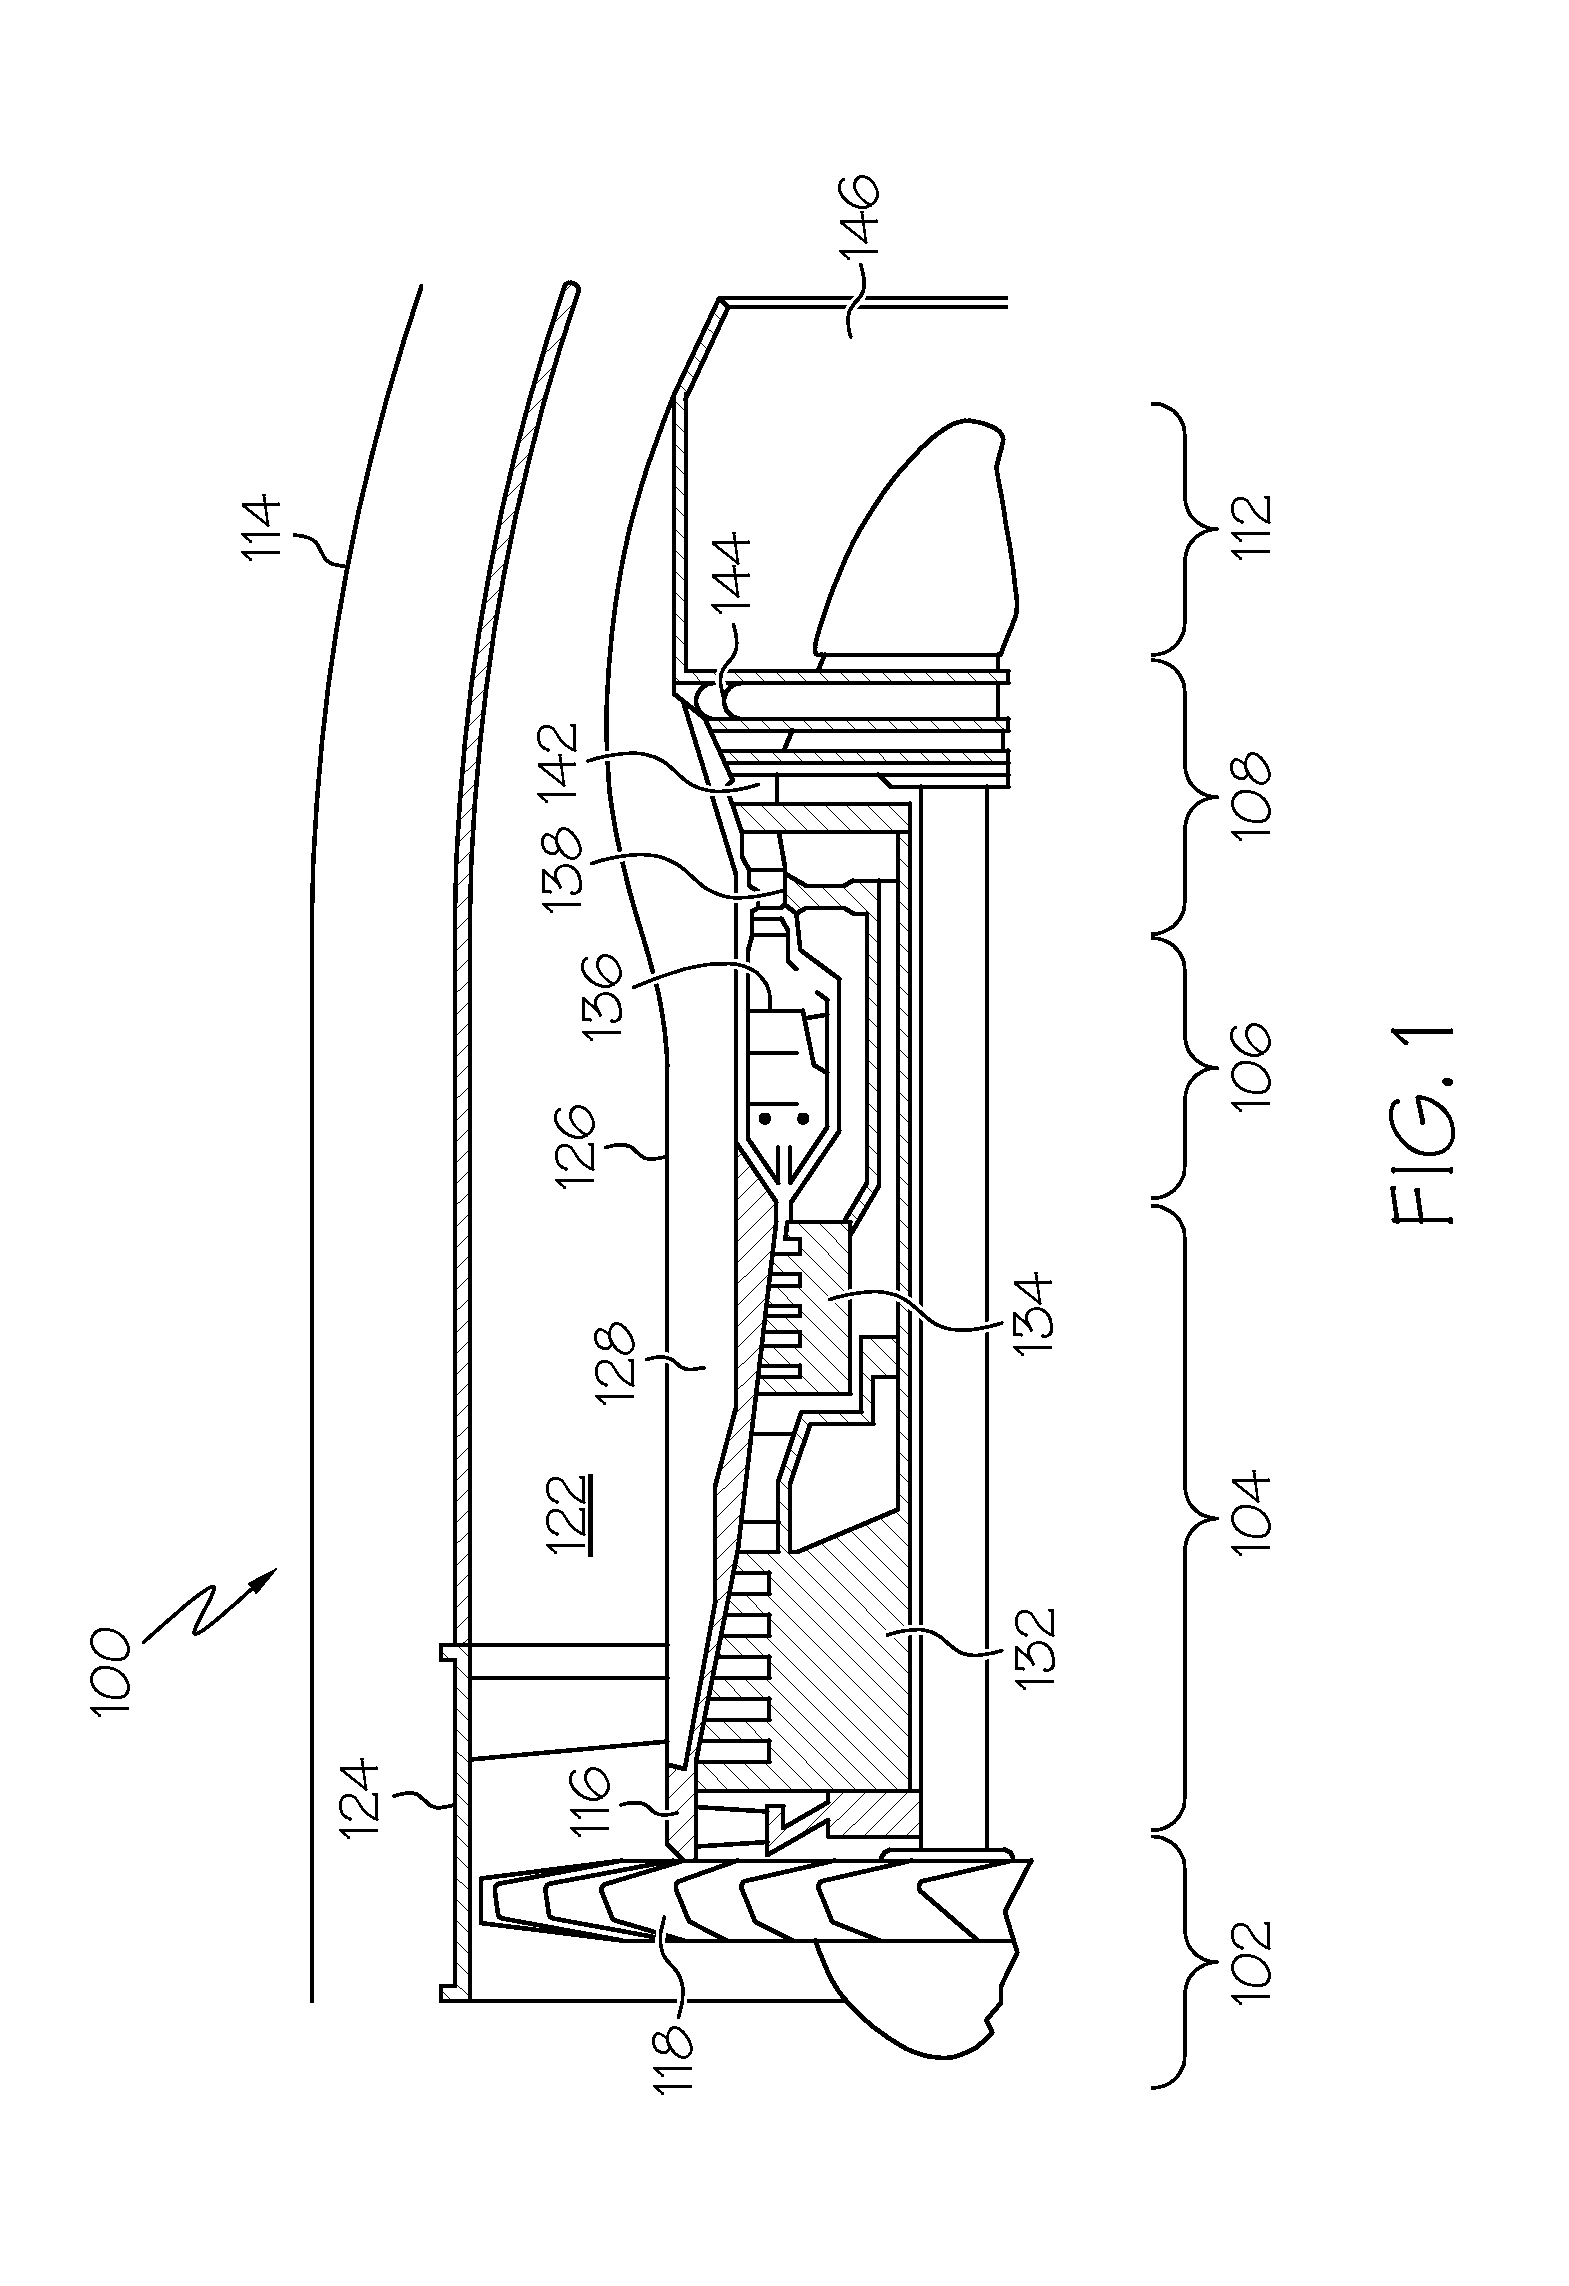 Gas turbine engine in-board cooled cooling air system